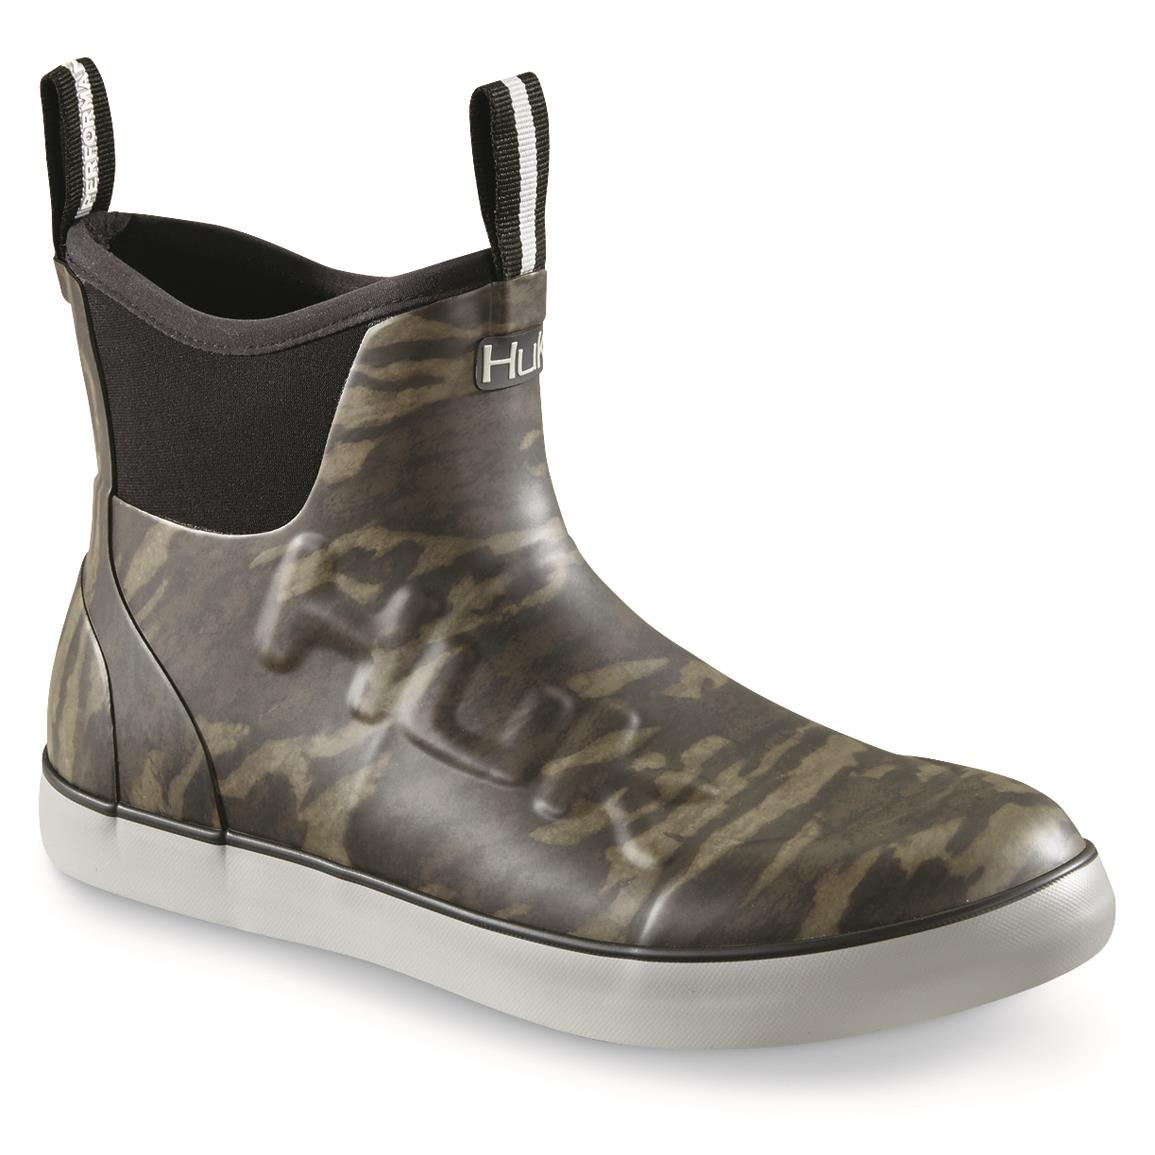 Huk Rogue Wave Slip-on Rubber Boots 